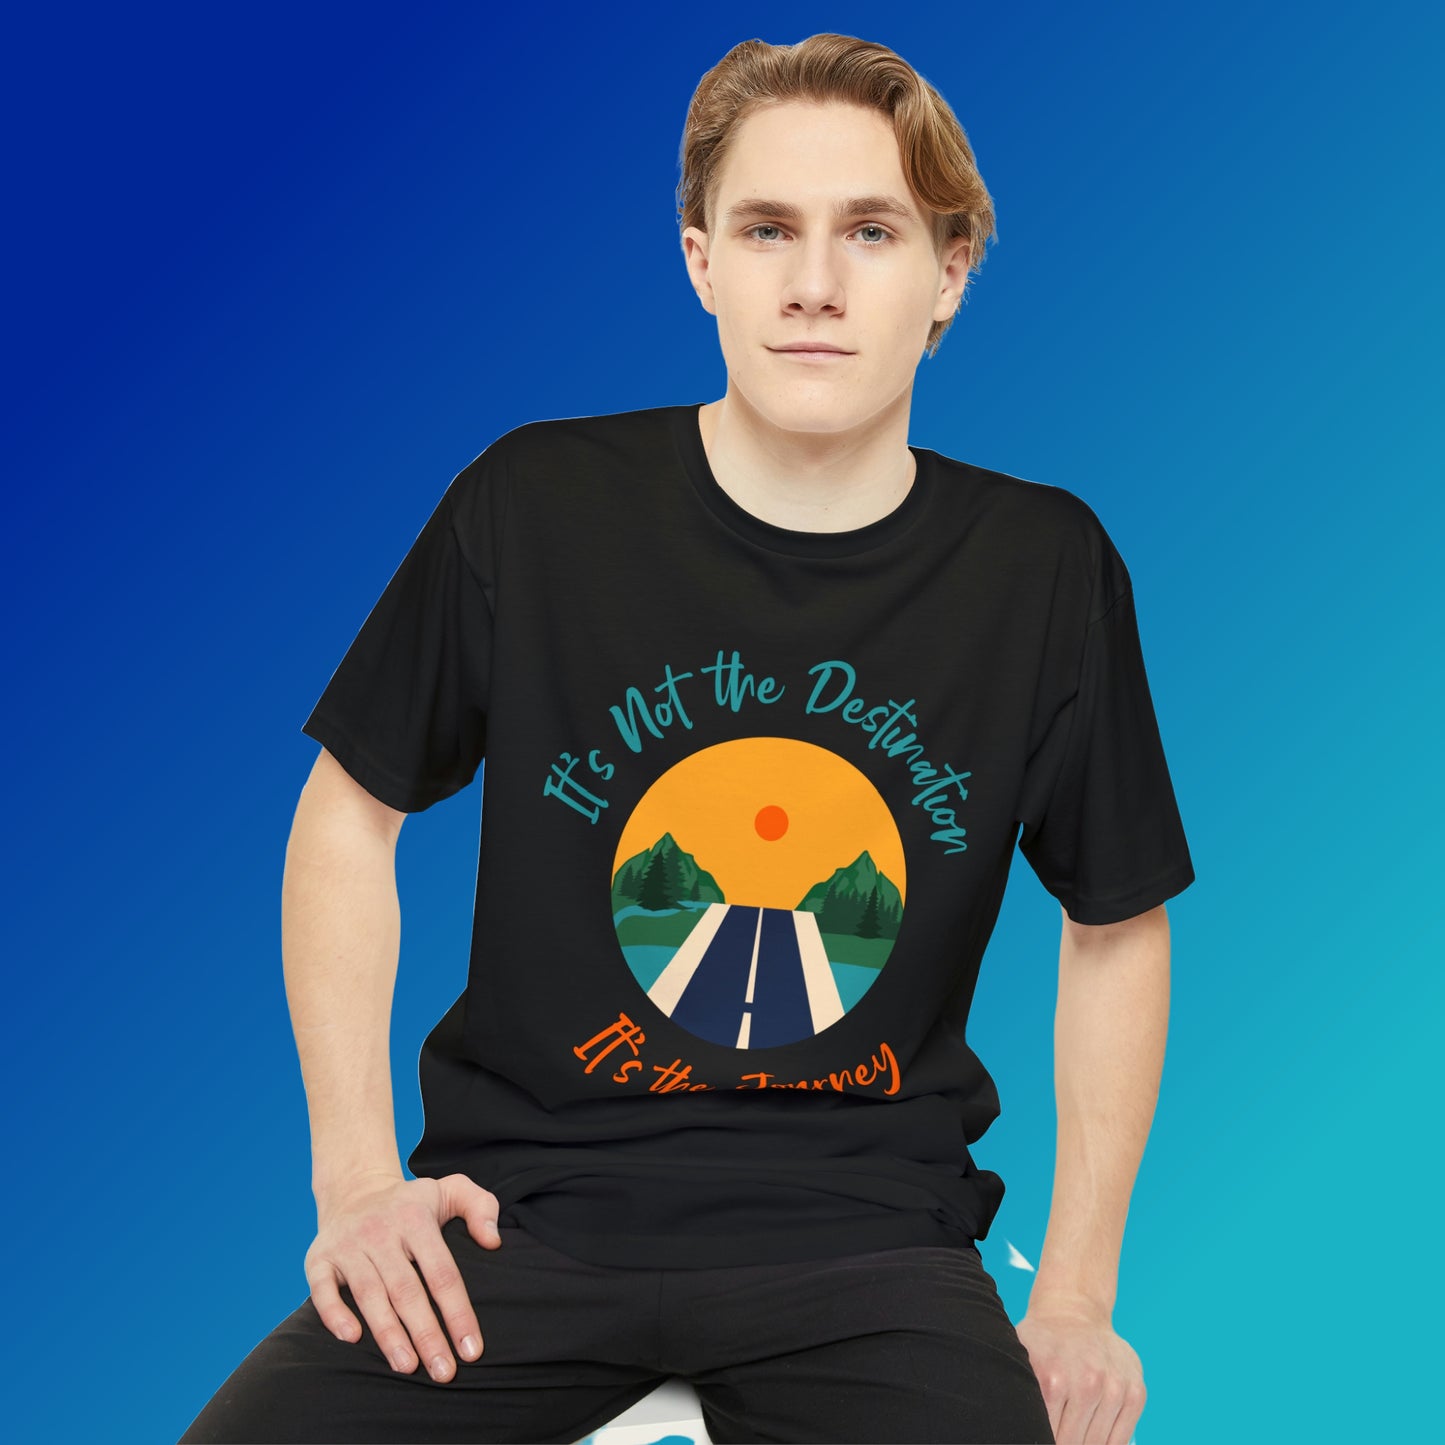 Mock up of a man sitting down wearing our Black t-shirt